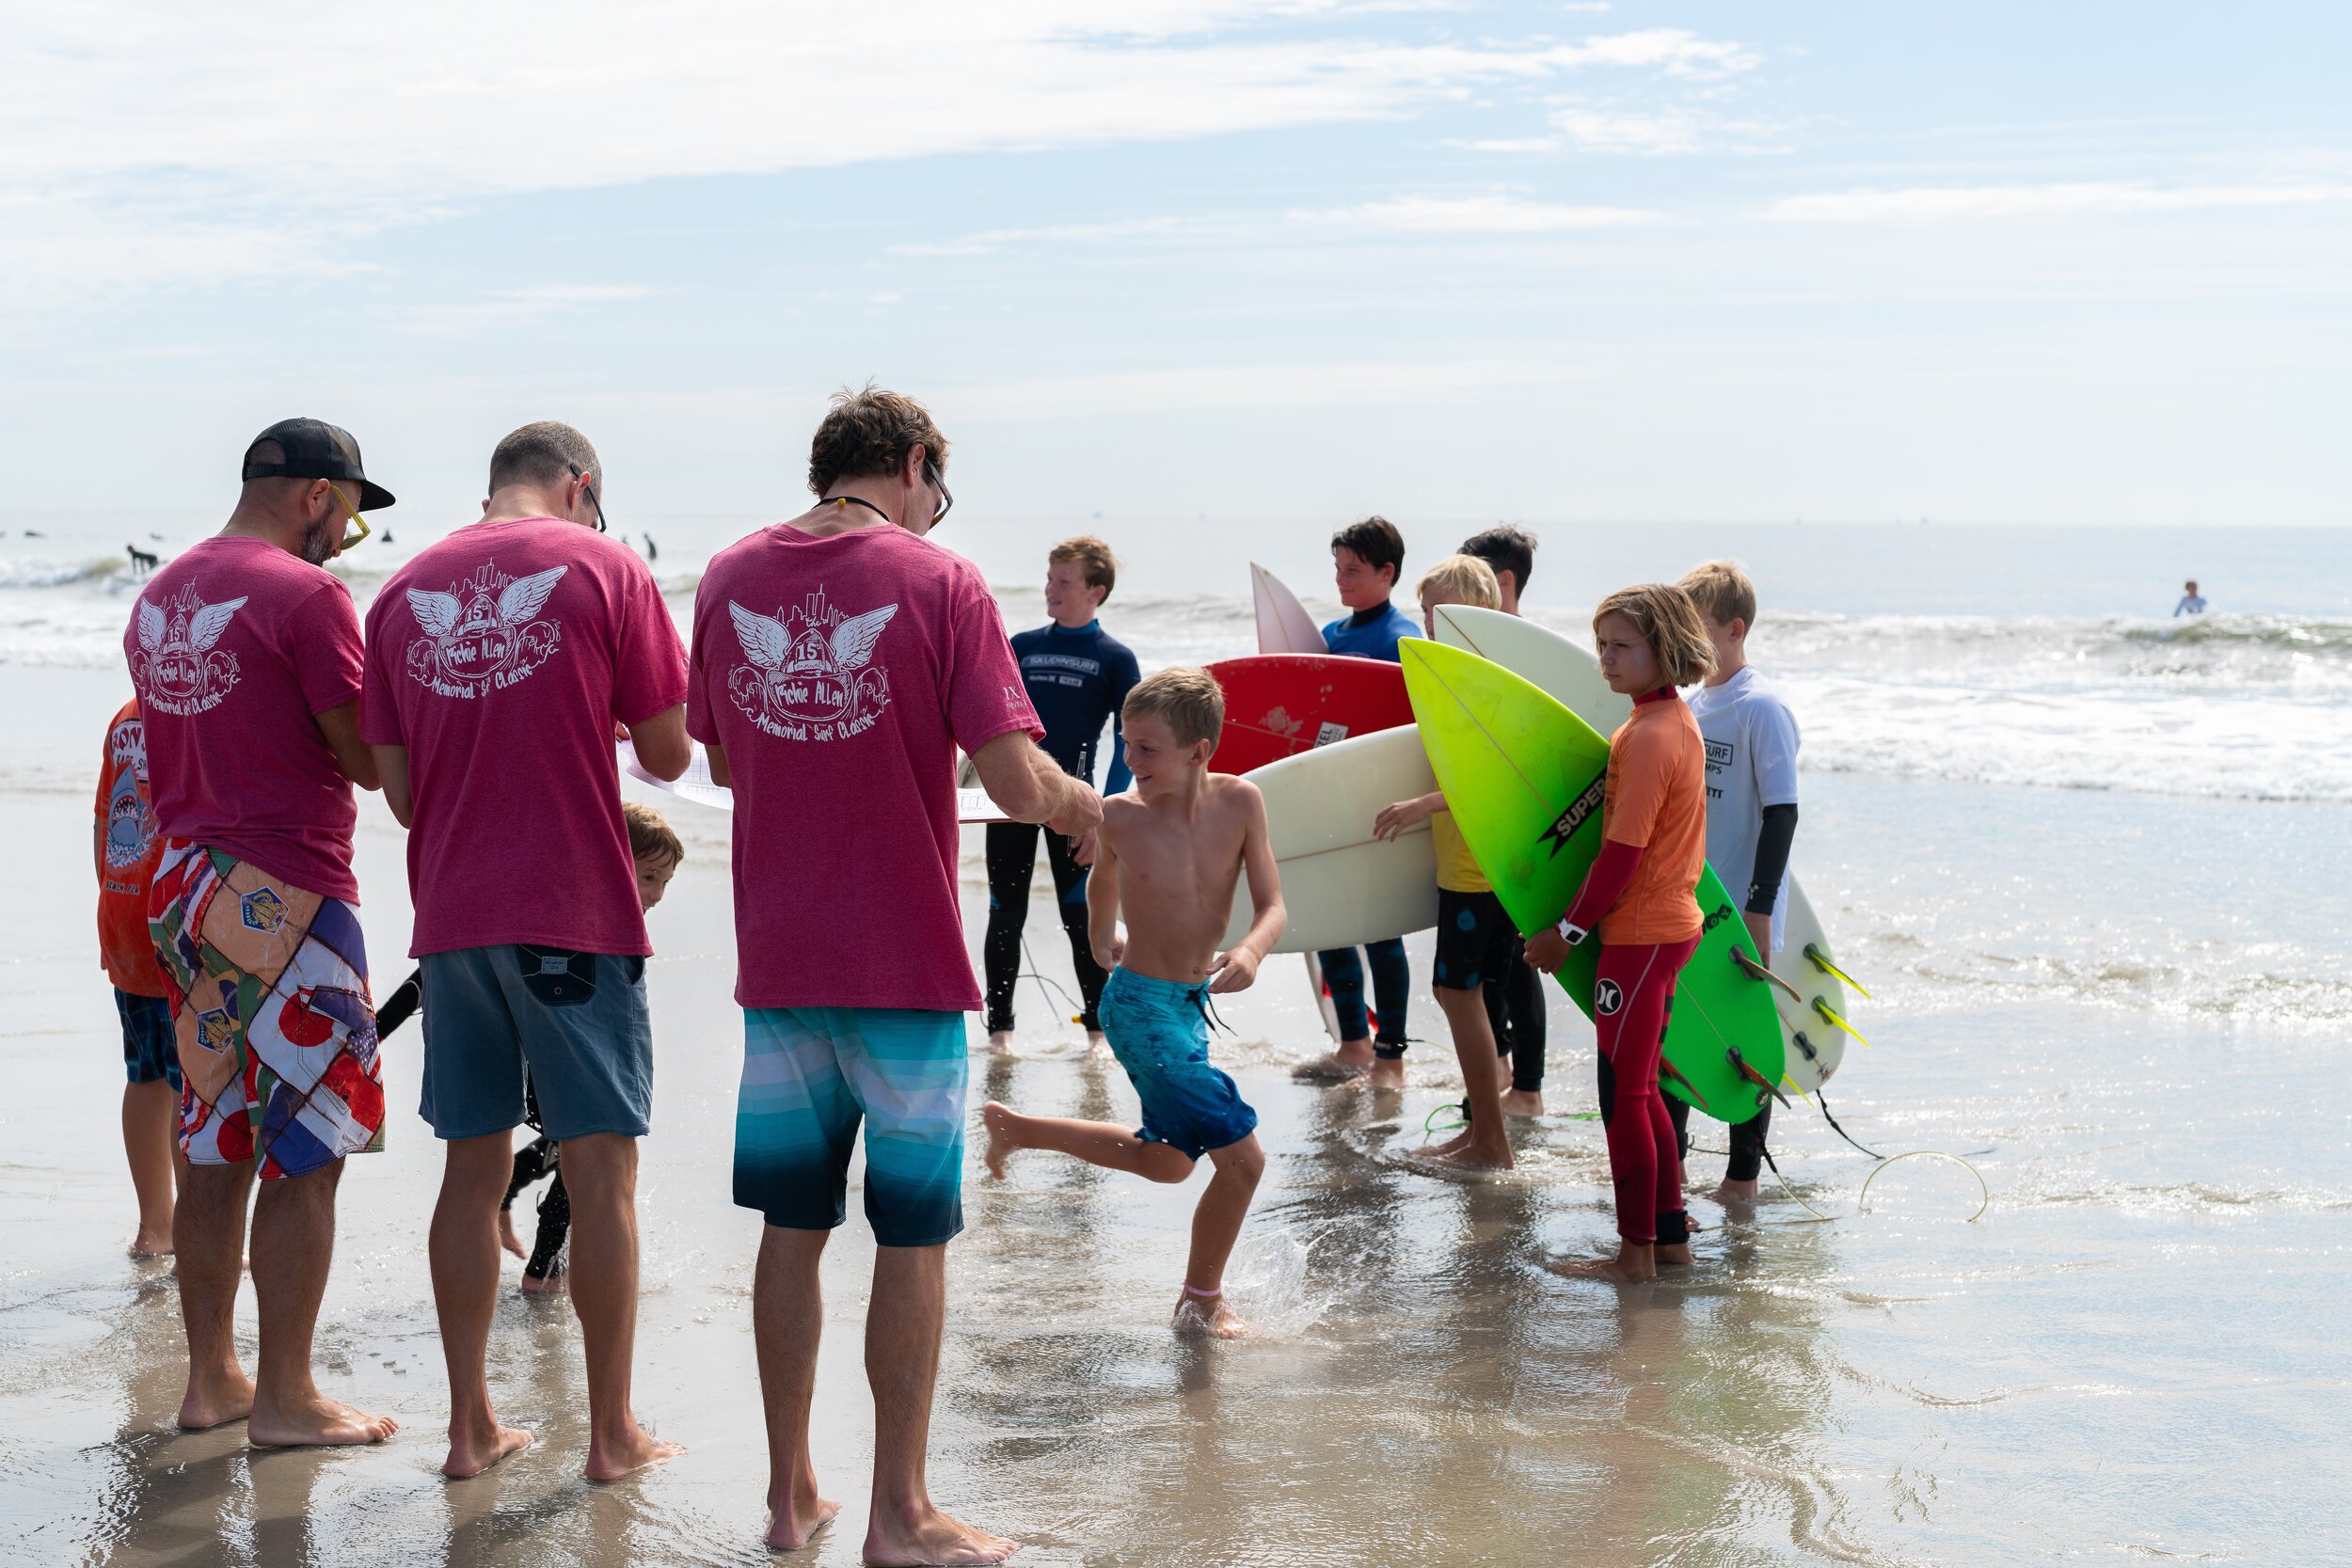   Young surfers wait for directions from the judges before heading into the water to compete in the 15th Annual Richie Allen Memorial Surf Classic.  